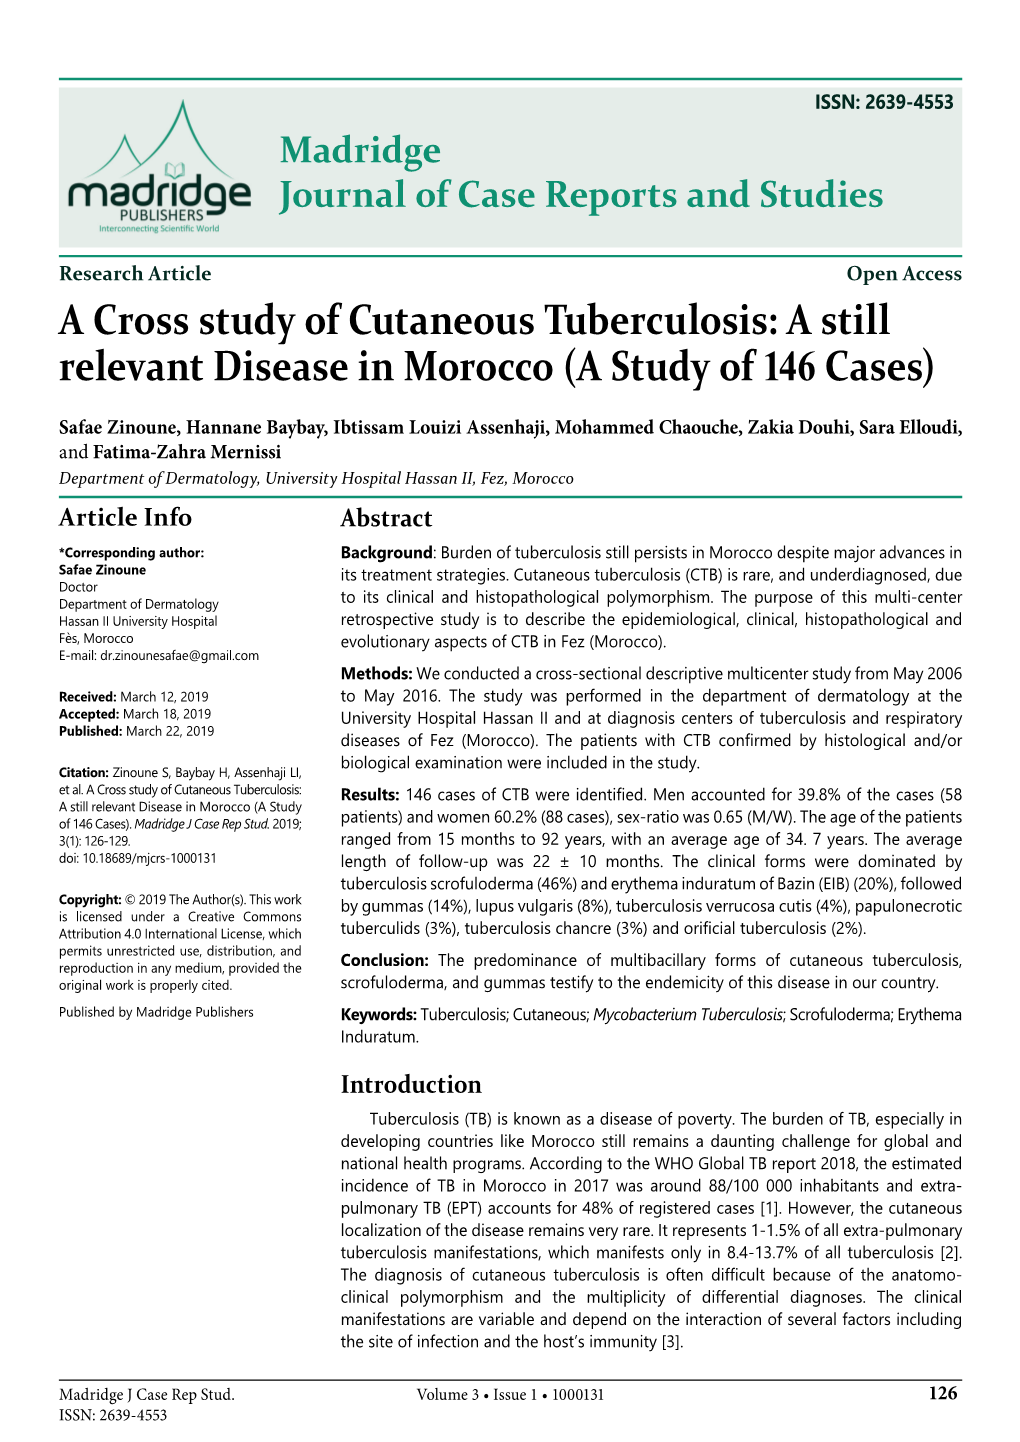 A Cross Study of Cutaneous Tuberculosis: a Still Relevant Disease in Morocco (A Study of 146 Cases)